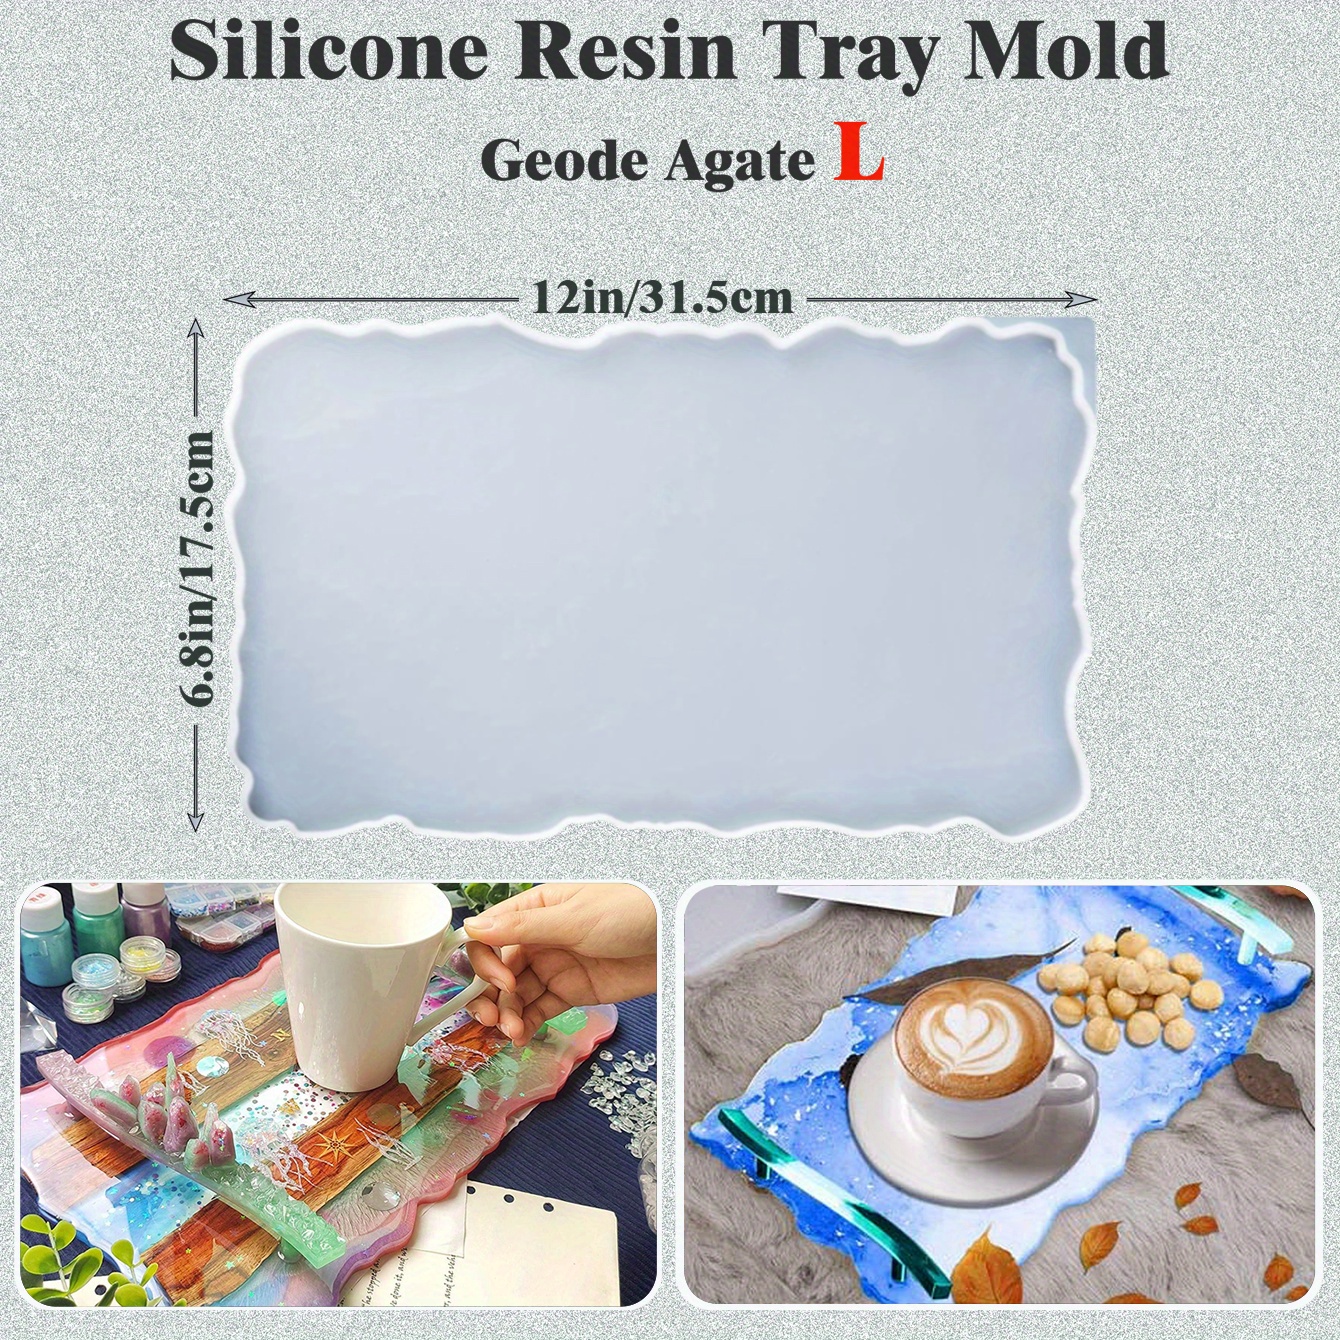 Large Resin Tray Mold Oversize Silicone Casting Molds for Resin